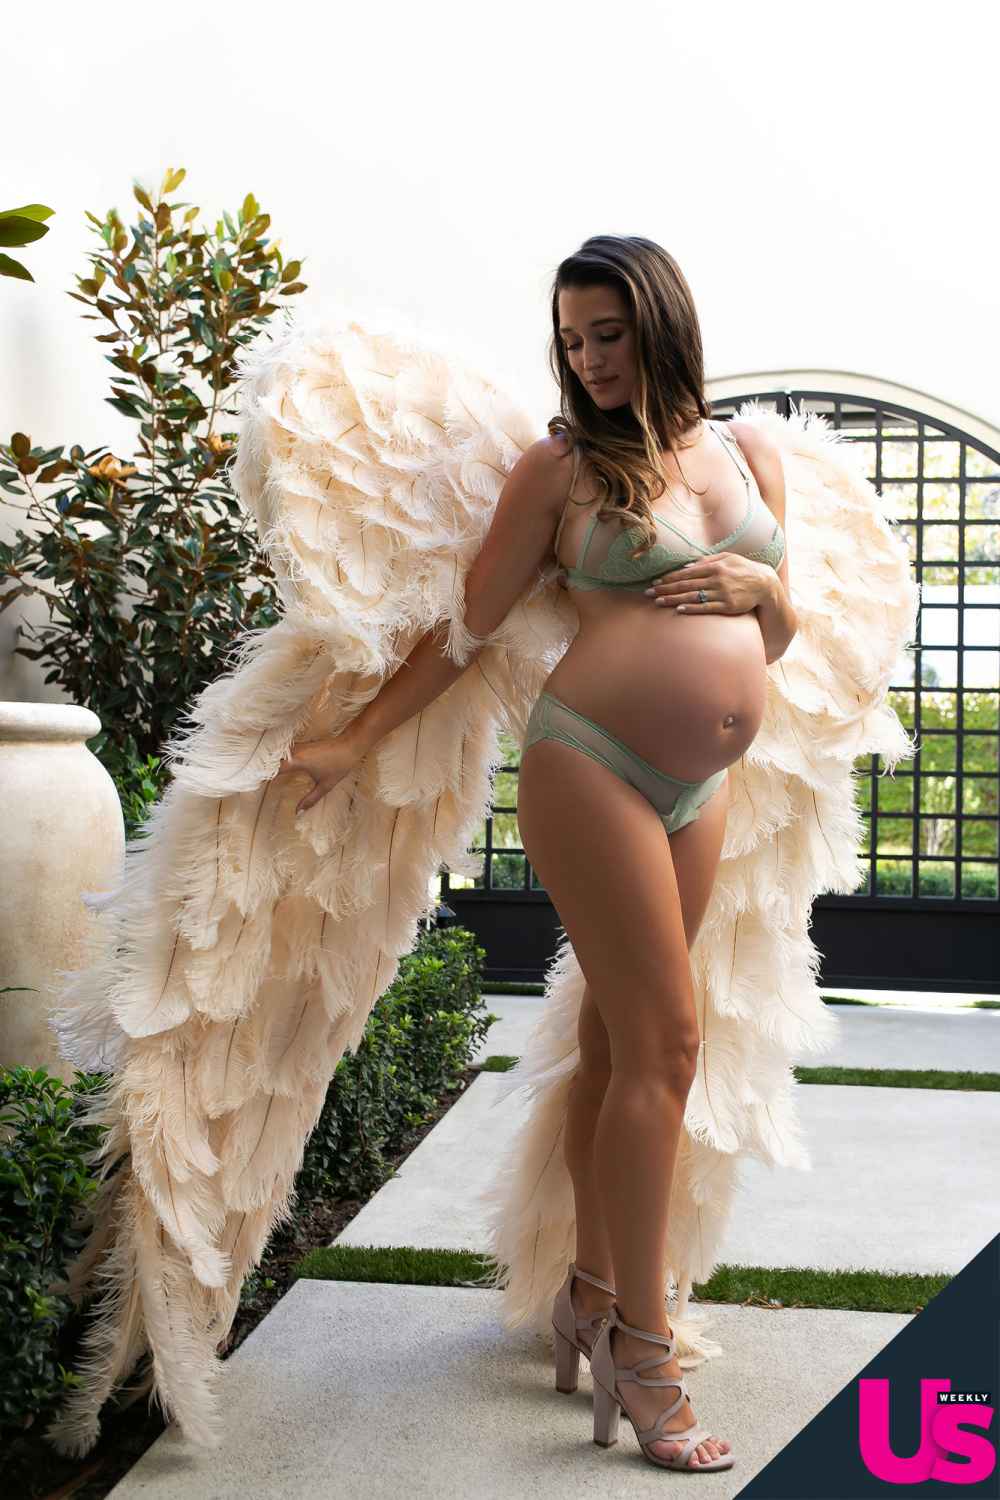 Pregnant Jade Roper Wears Wings in Stunning Maternity Shoot Ahead of 3rd Child